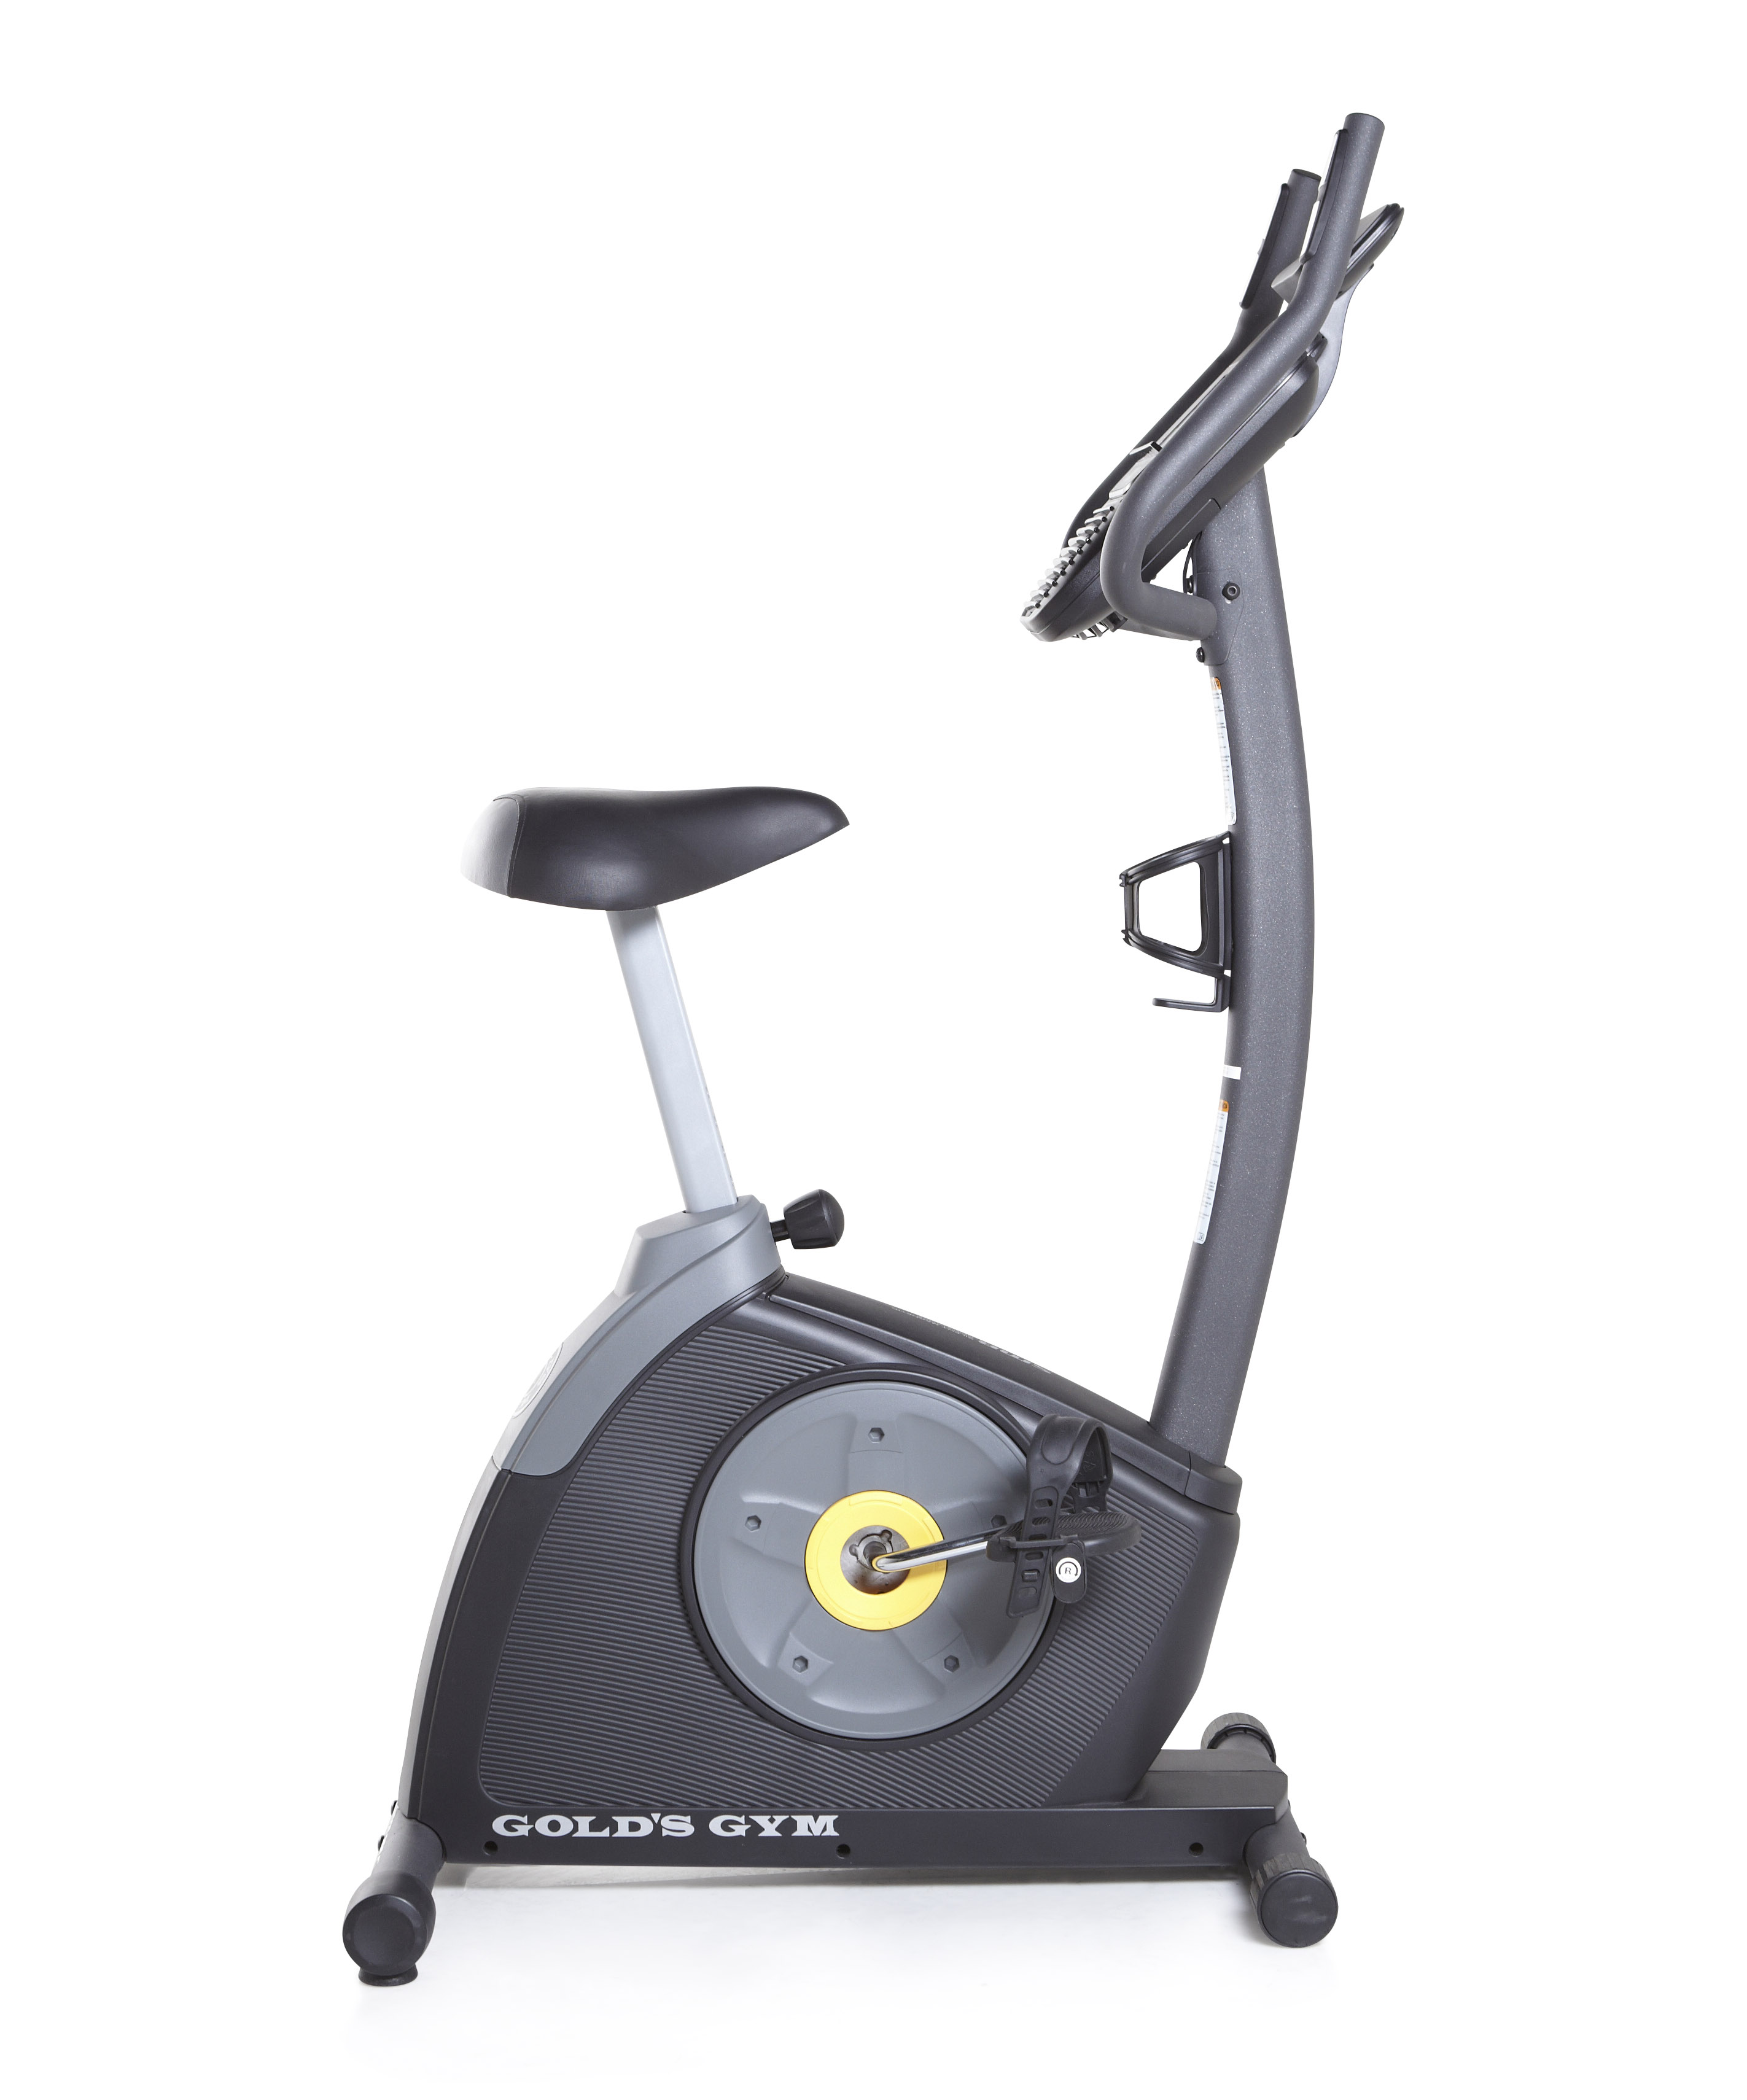 Gold's Gym Cycle Trainer 300 Ci Upright Exercise Bike - iFit Compatible - image 3 of 4